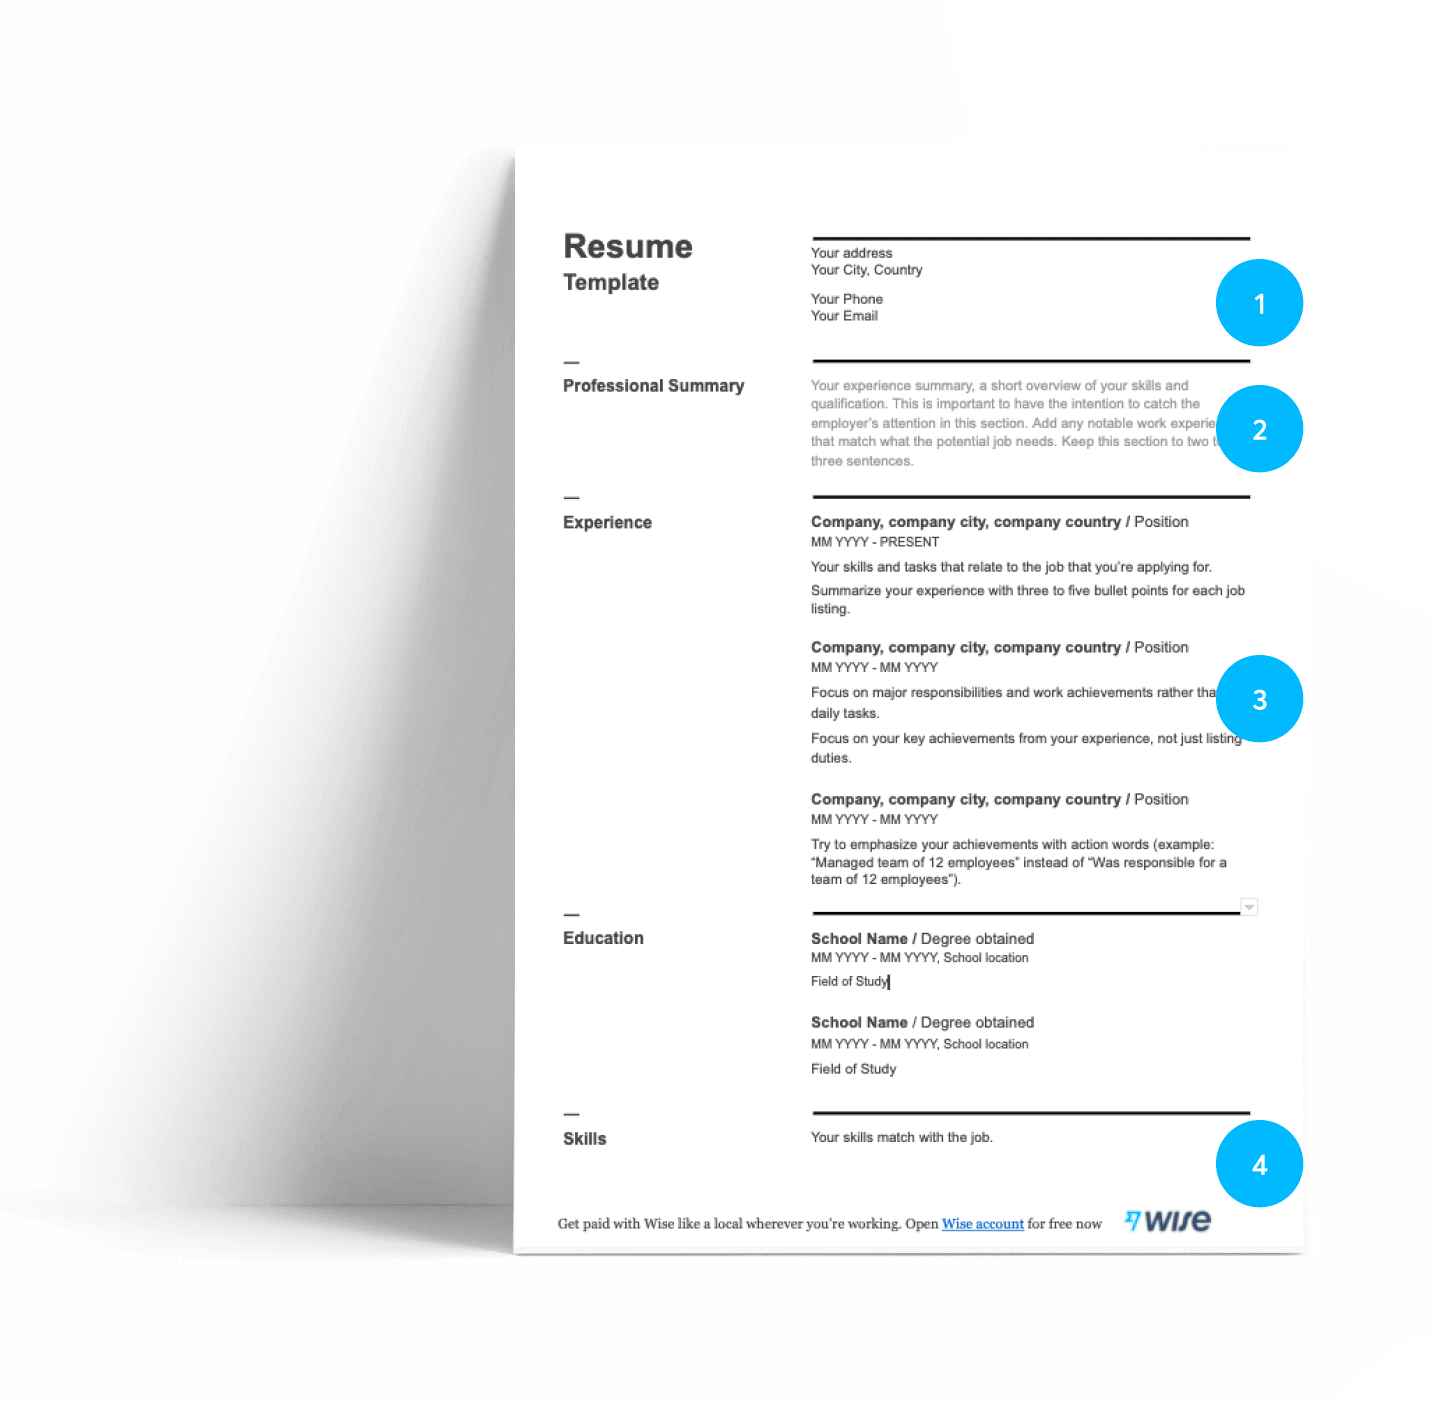 How to write an academic resume?